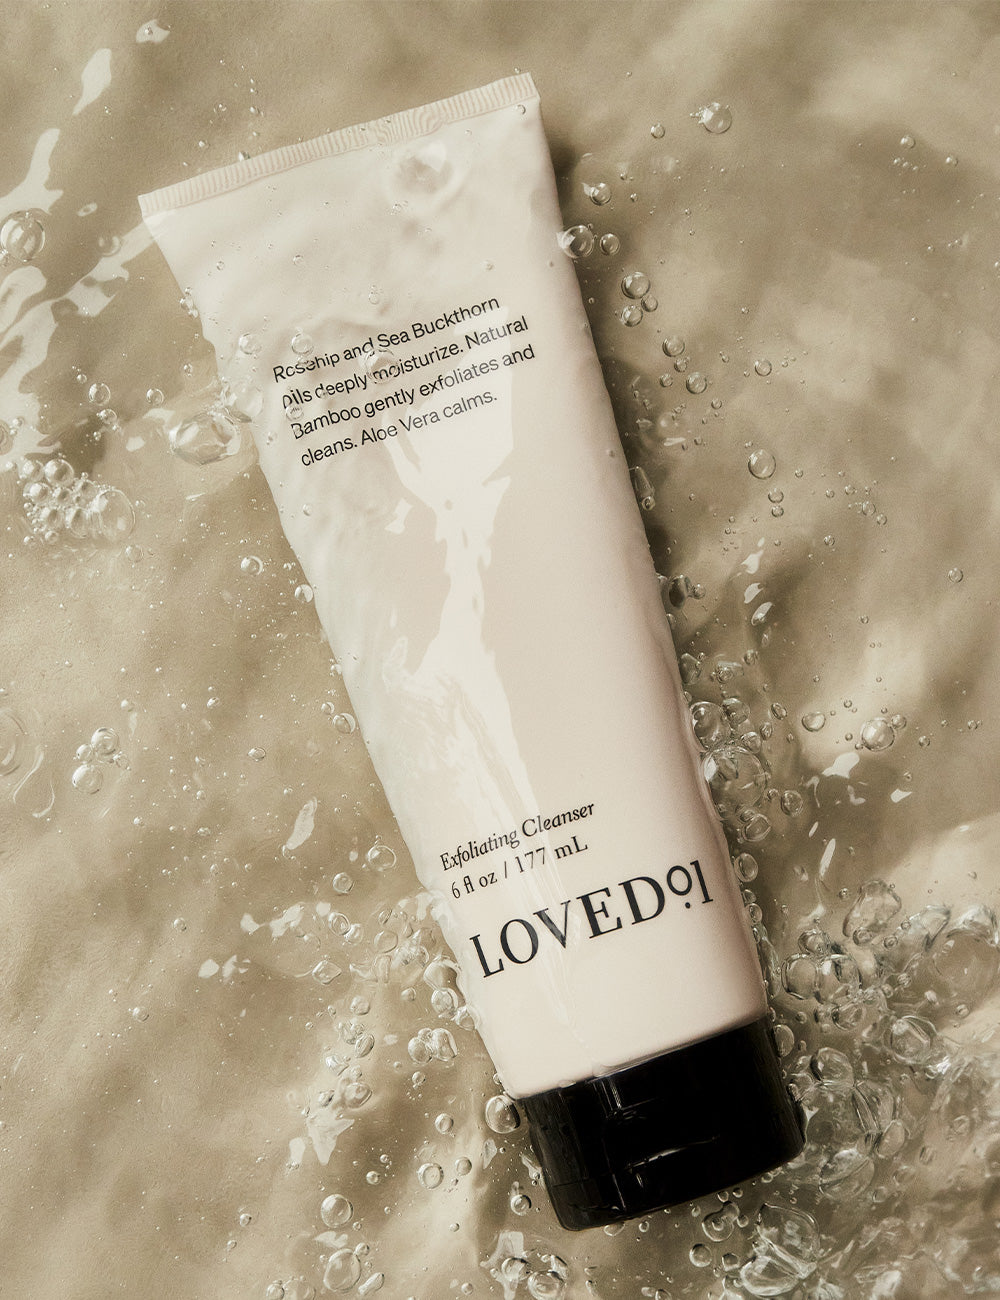 A tube of exfoliating cleanser with water droplets running down the sides, on a tan background.